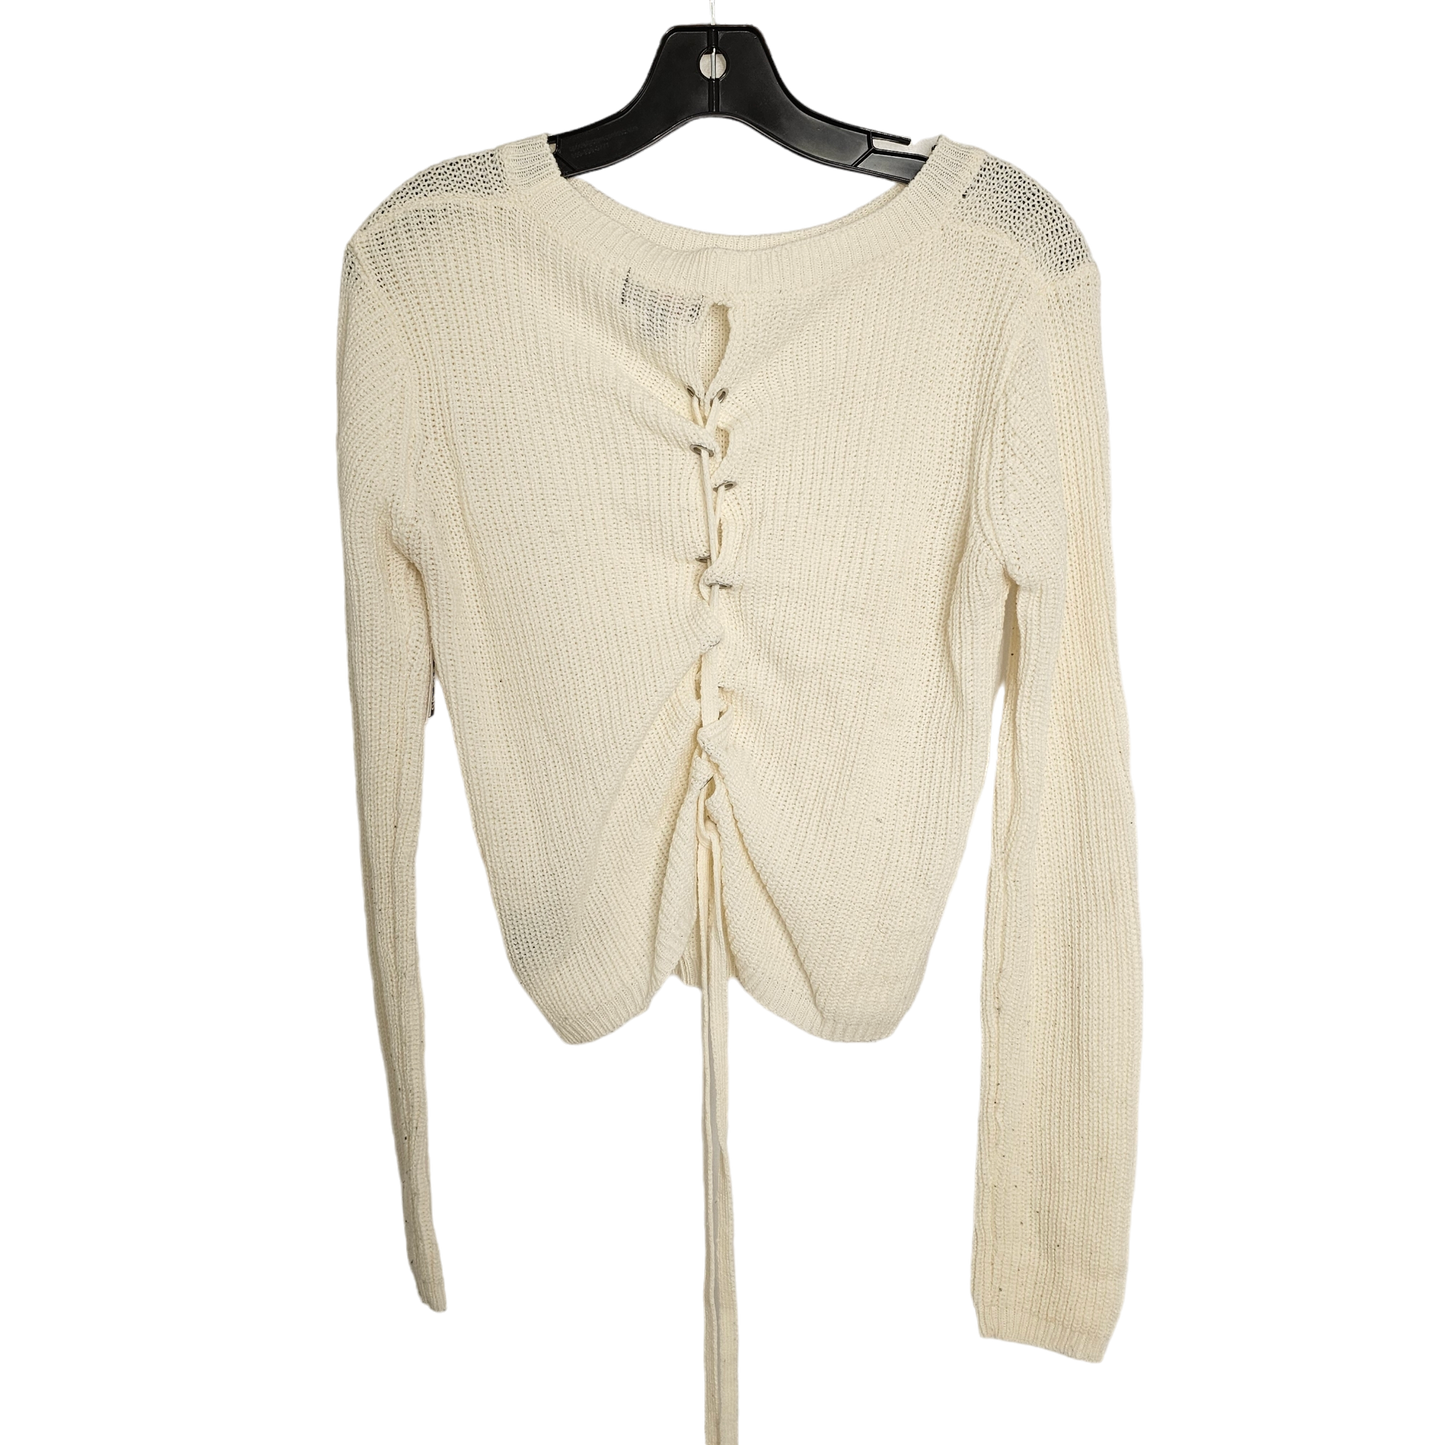 Cream Sweater Ambiance Apparel, Size S